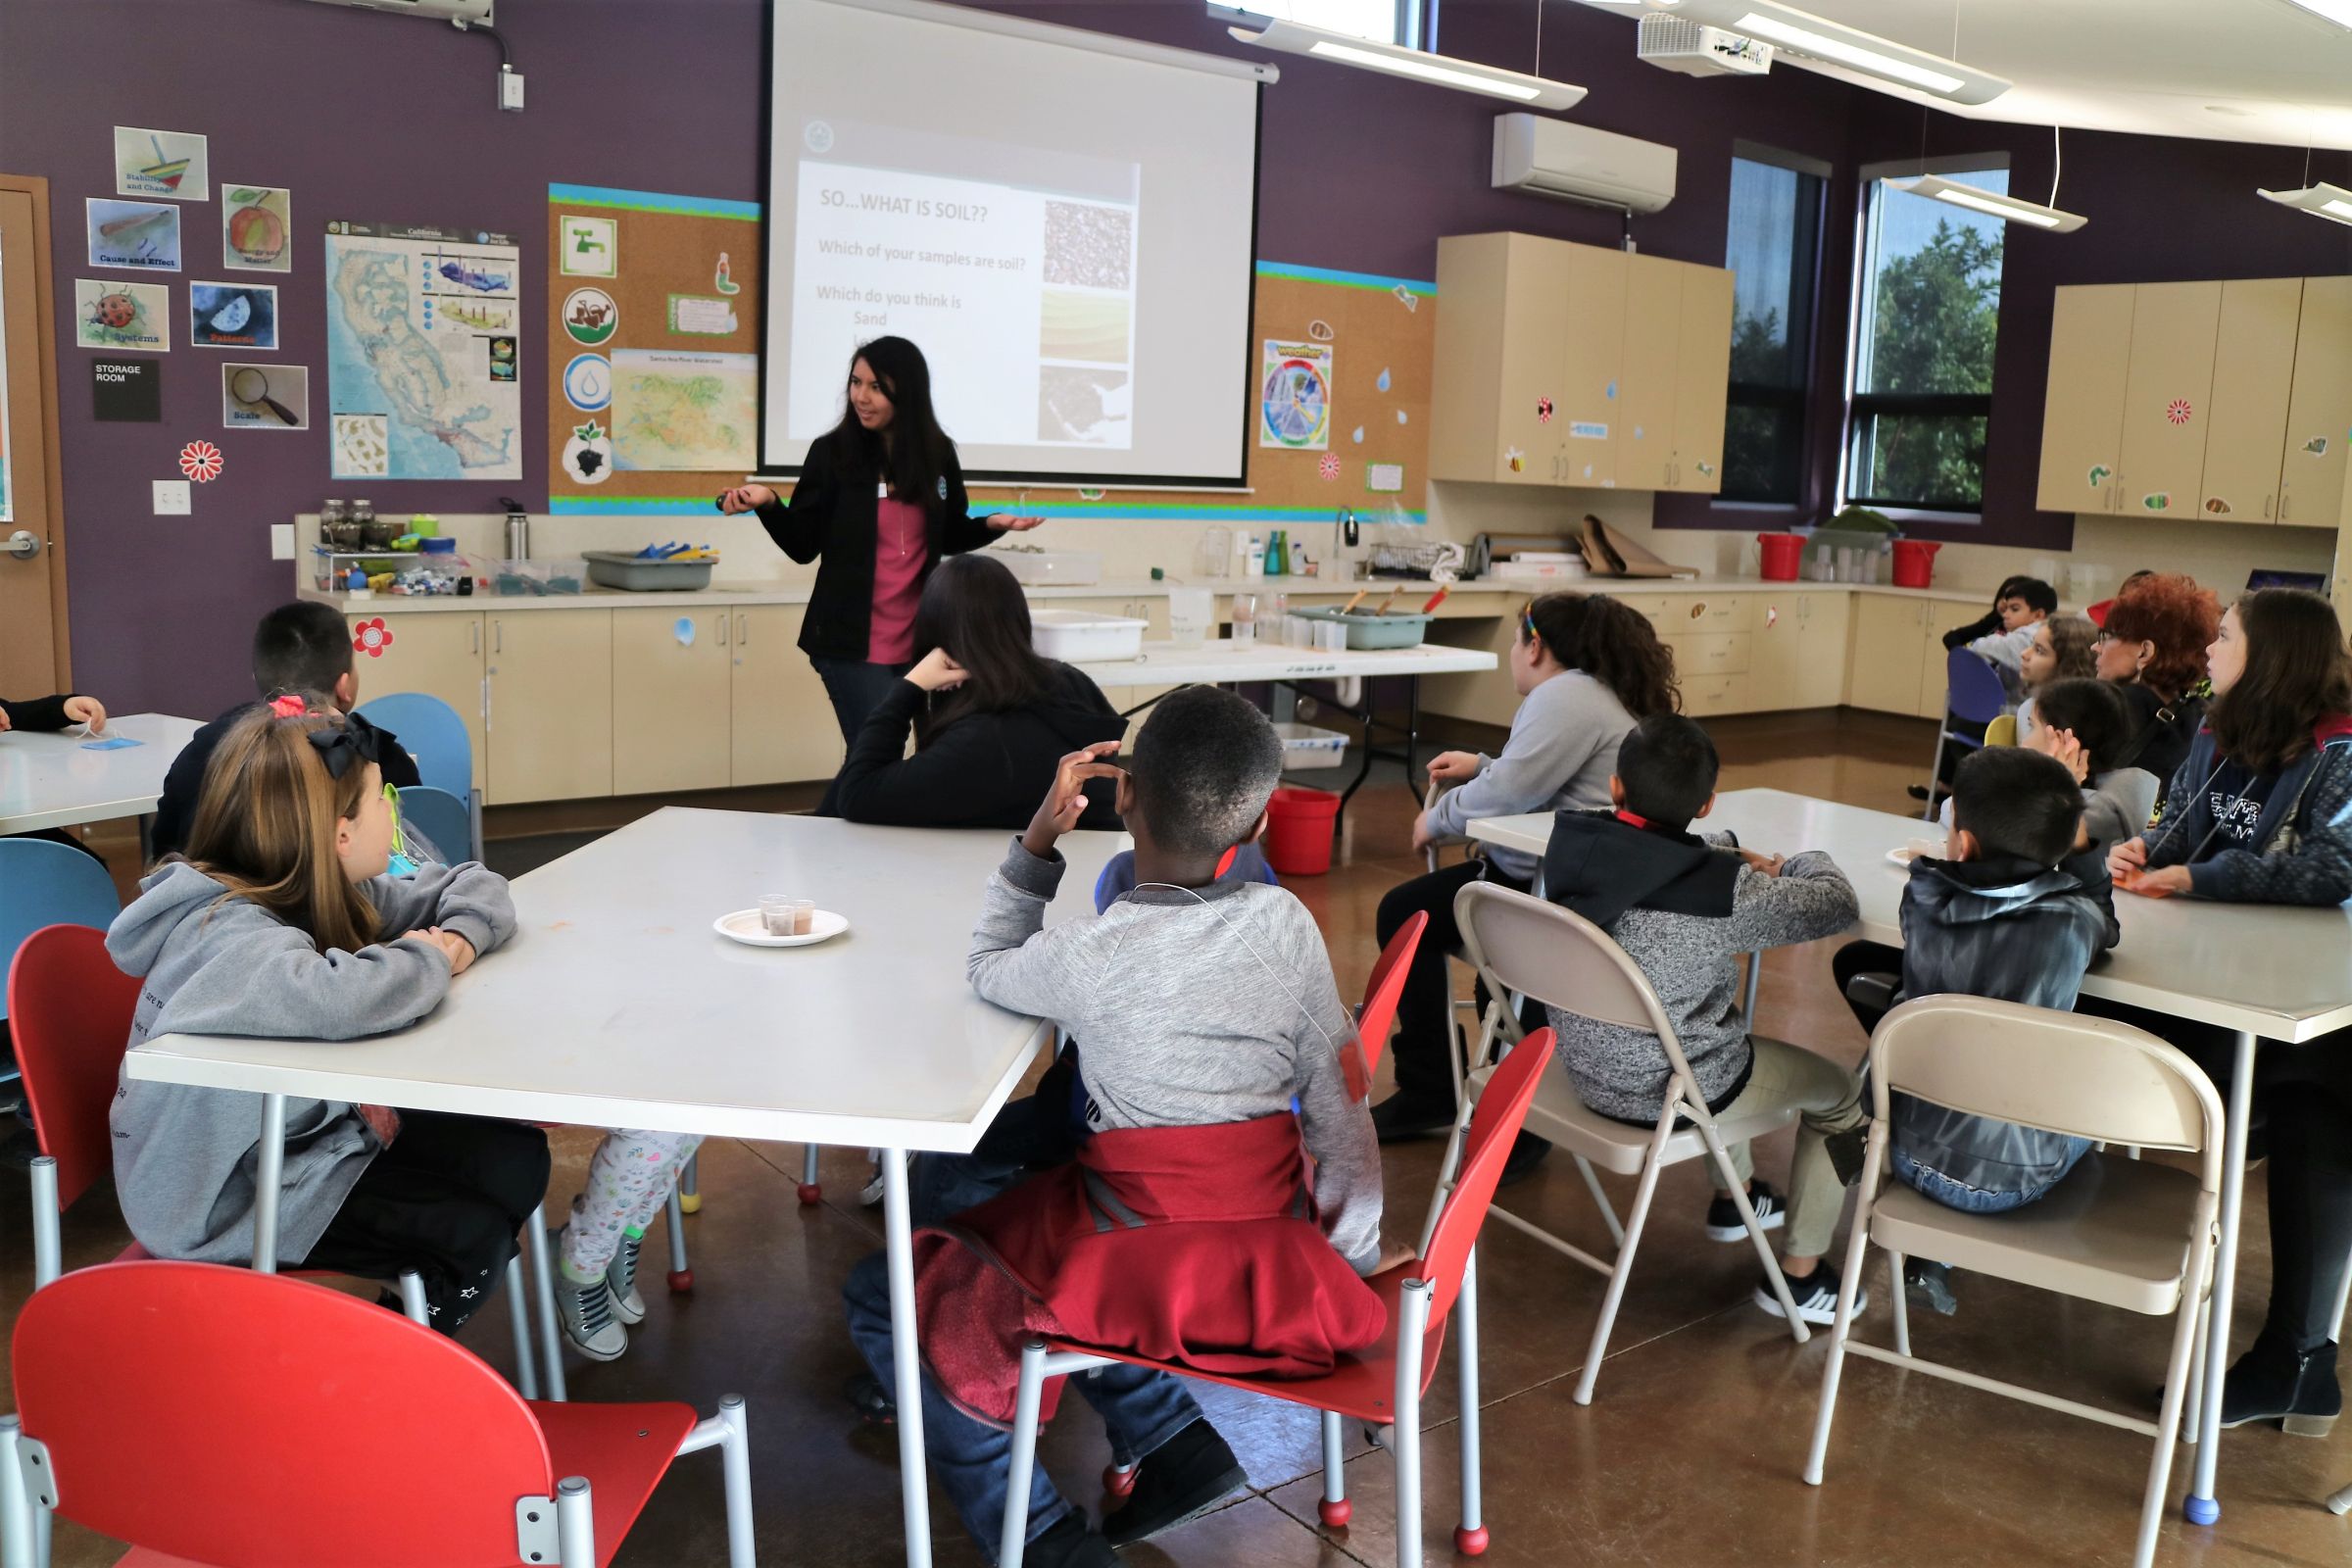 Jenna facilitates a discussion about soil with students at Chino Basin Water Conservation District.